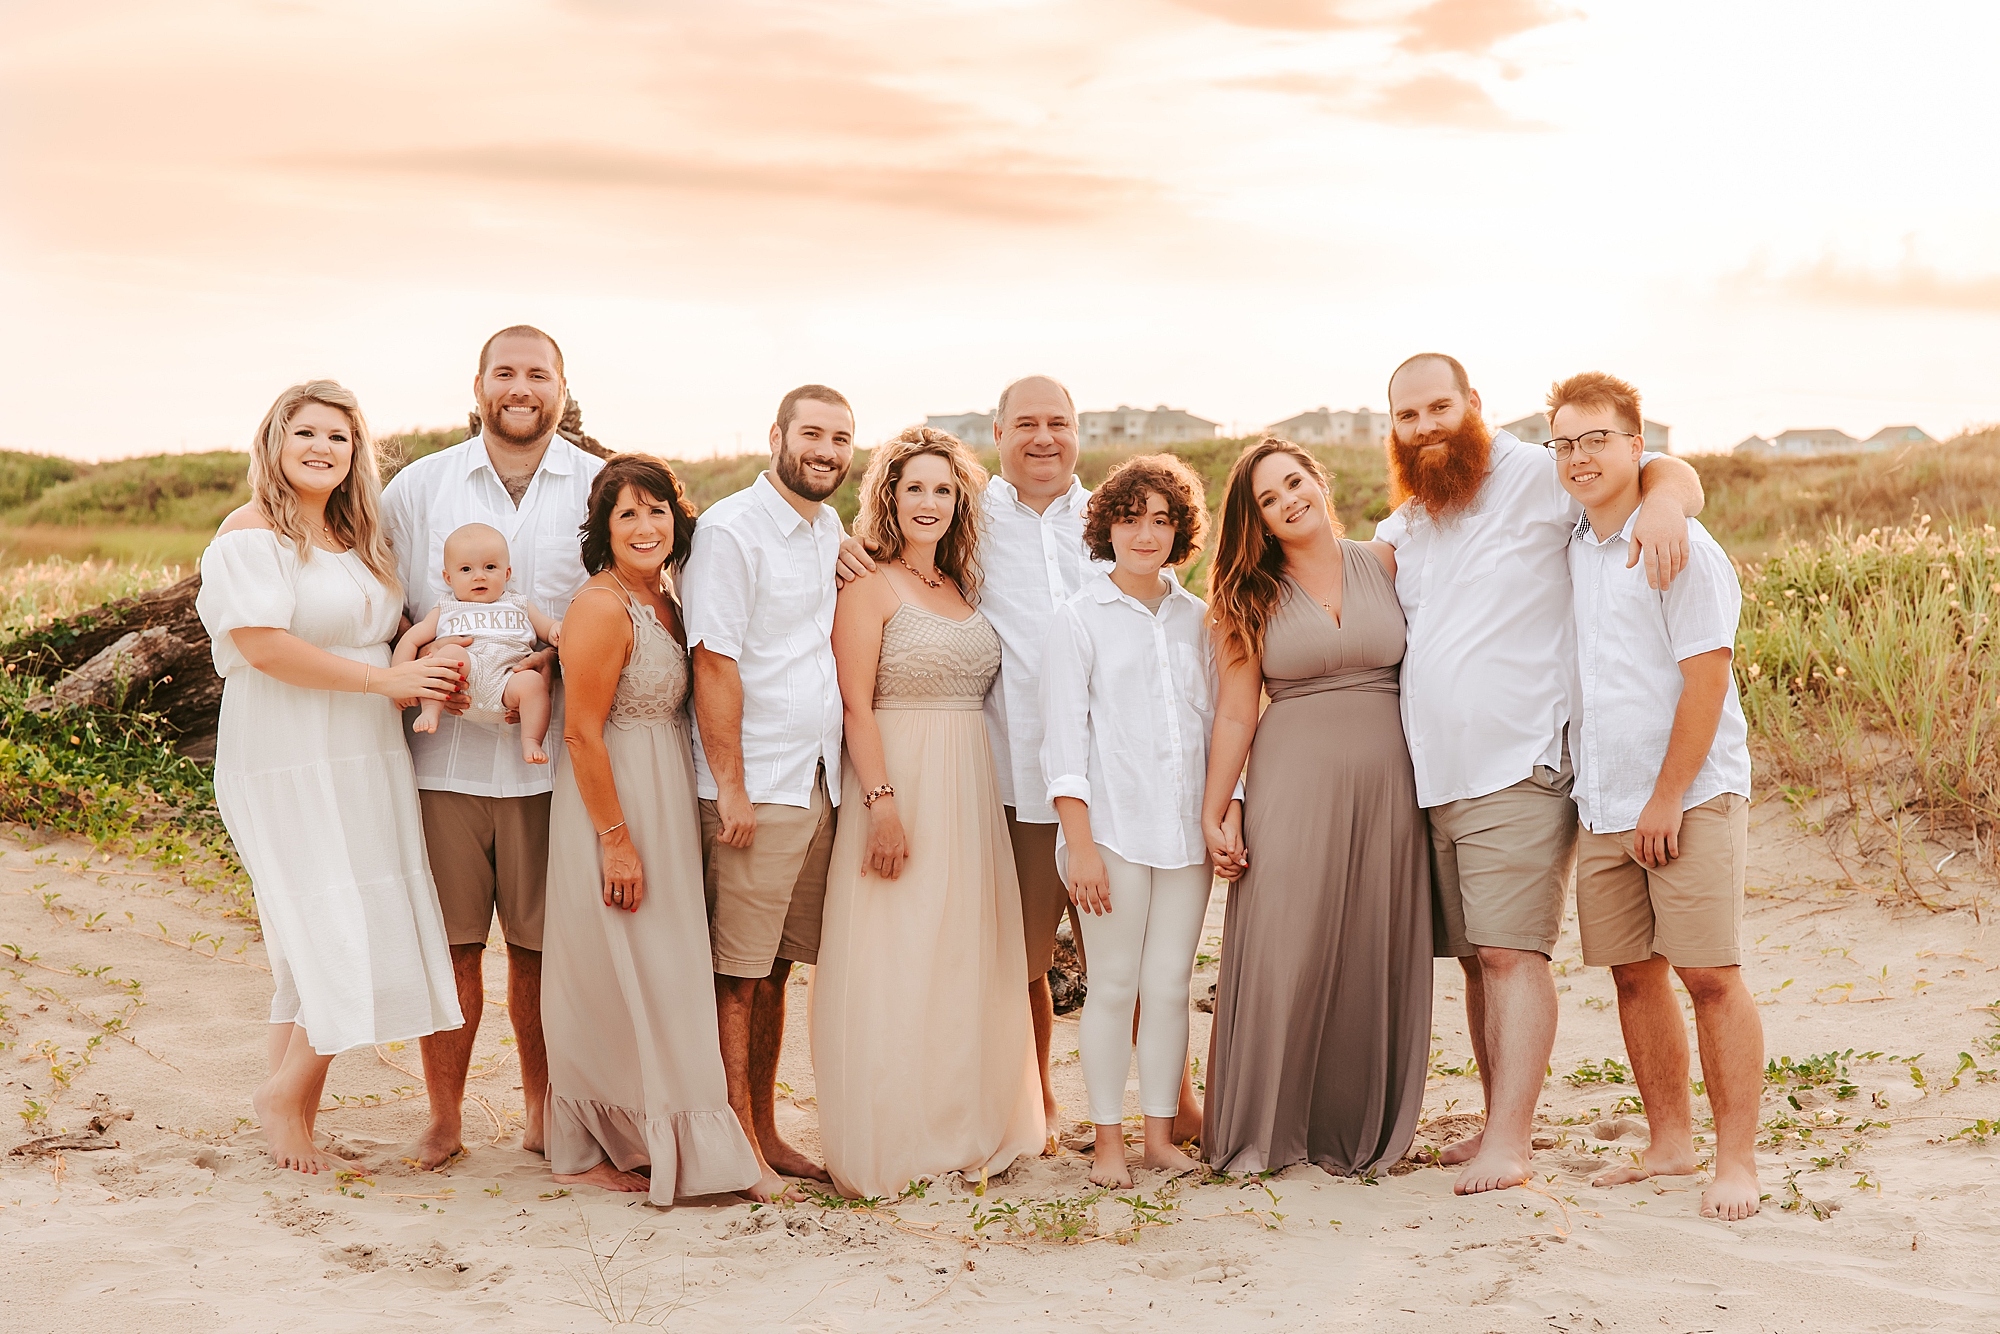 A Heartwarming Large Family Photoshoot - Anna Kennedy Photography